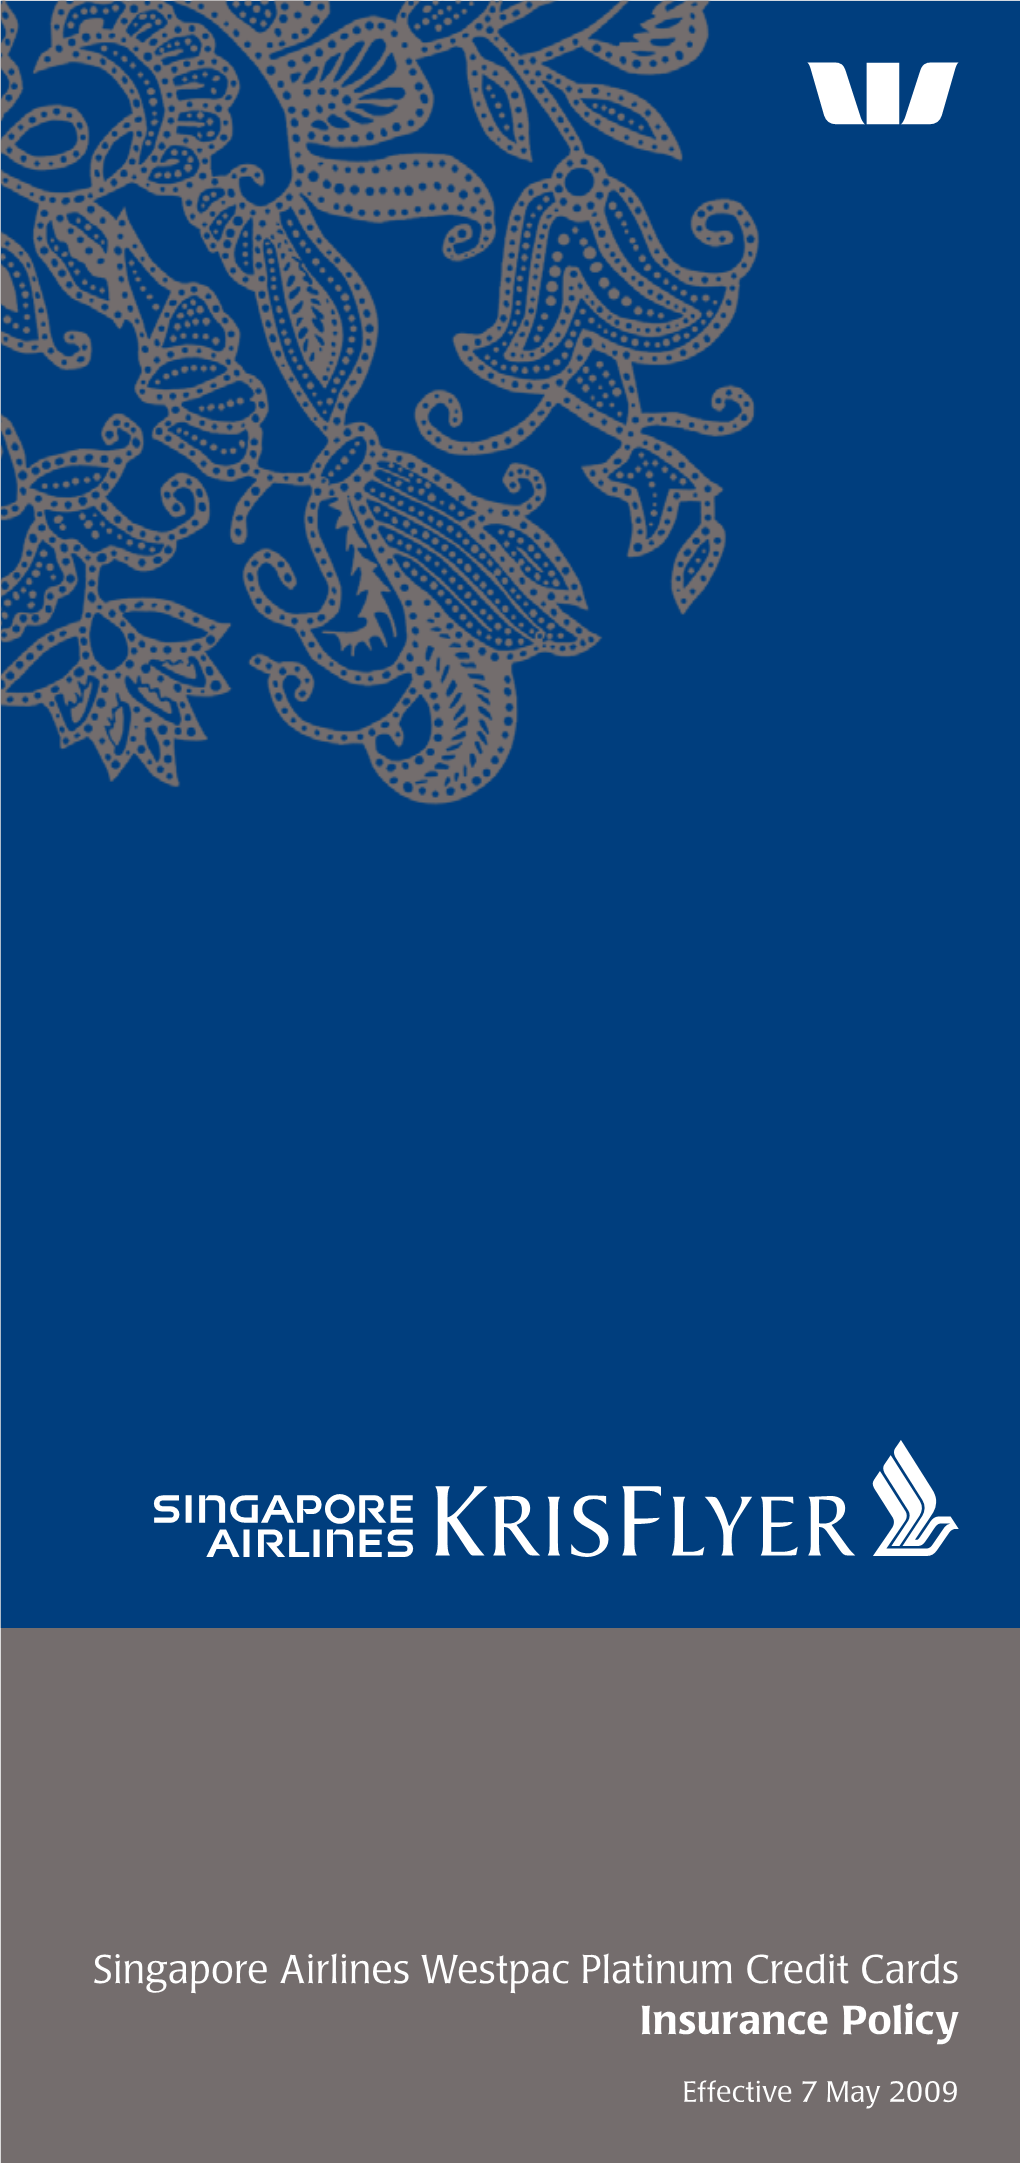 Singapore Airlines Westpac Platinum Credit Cards Insurance Policy